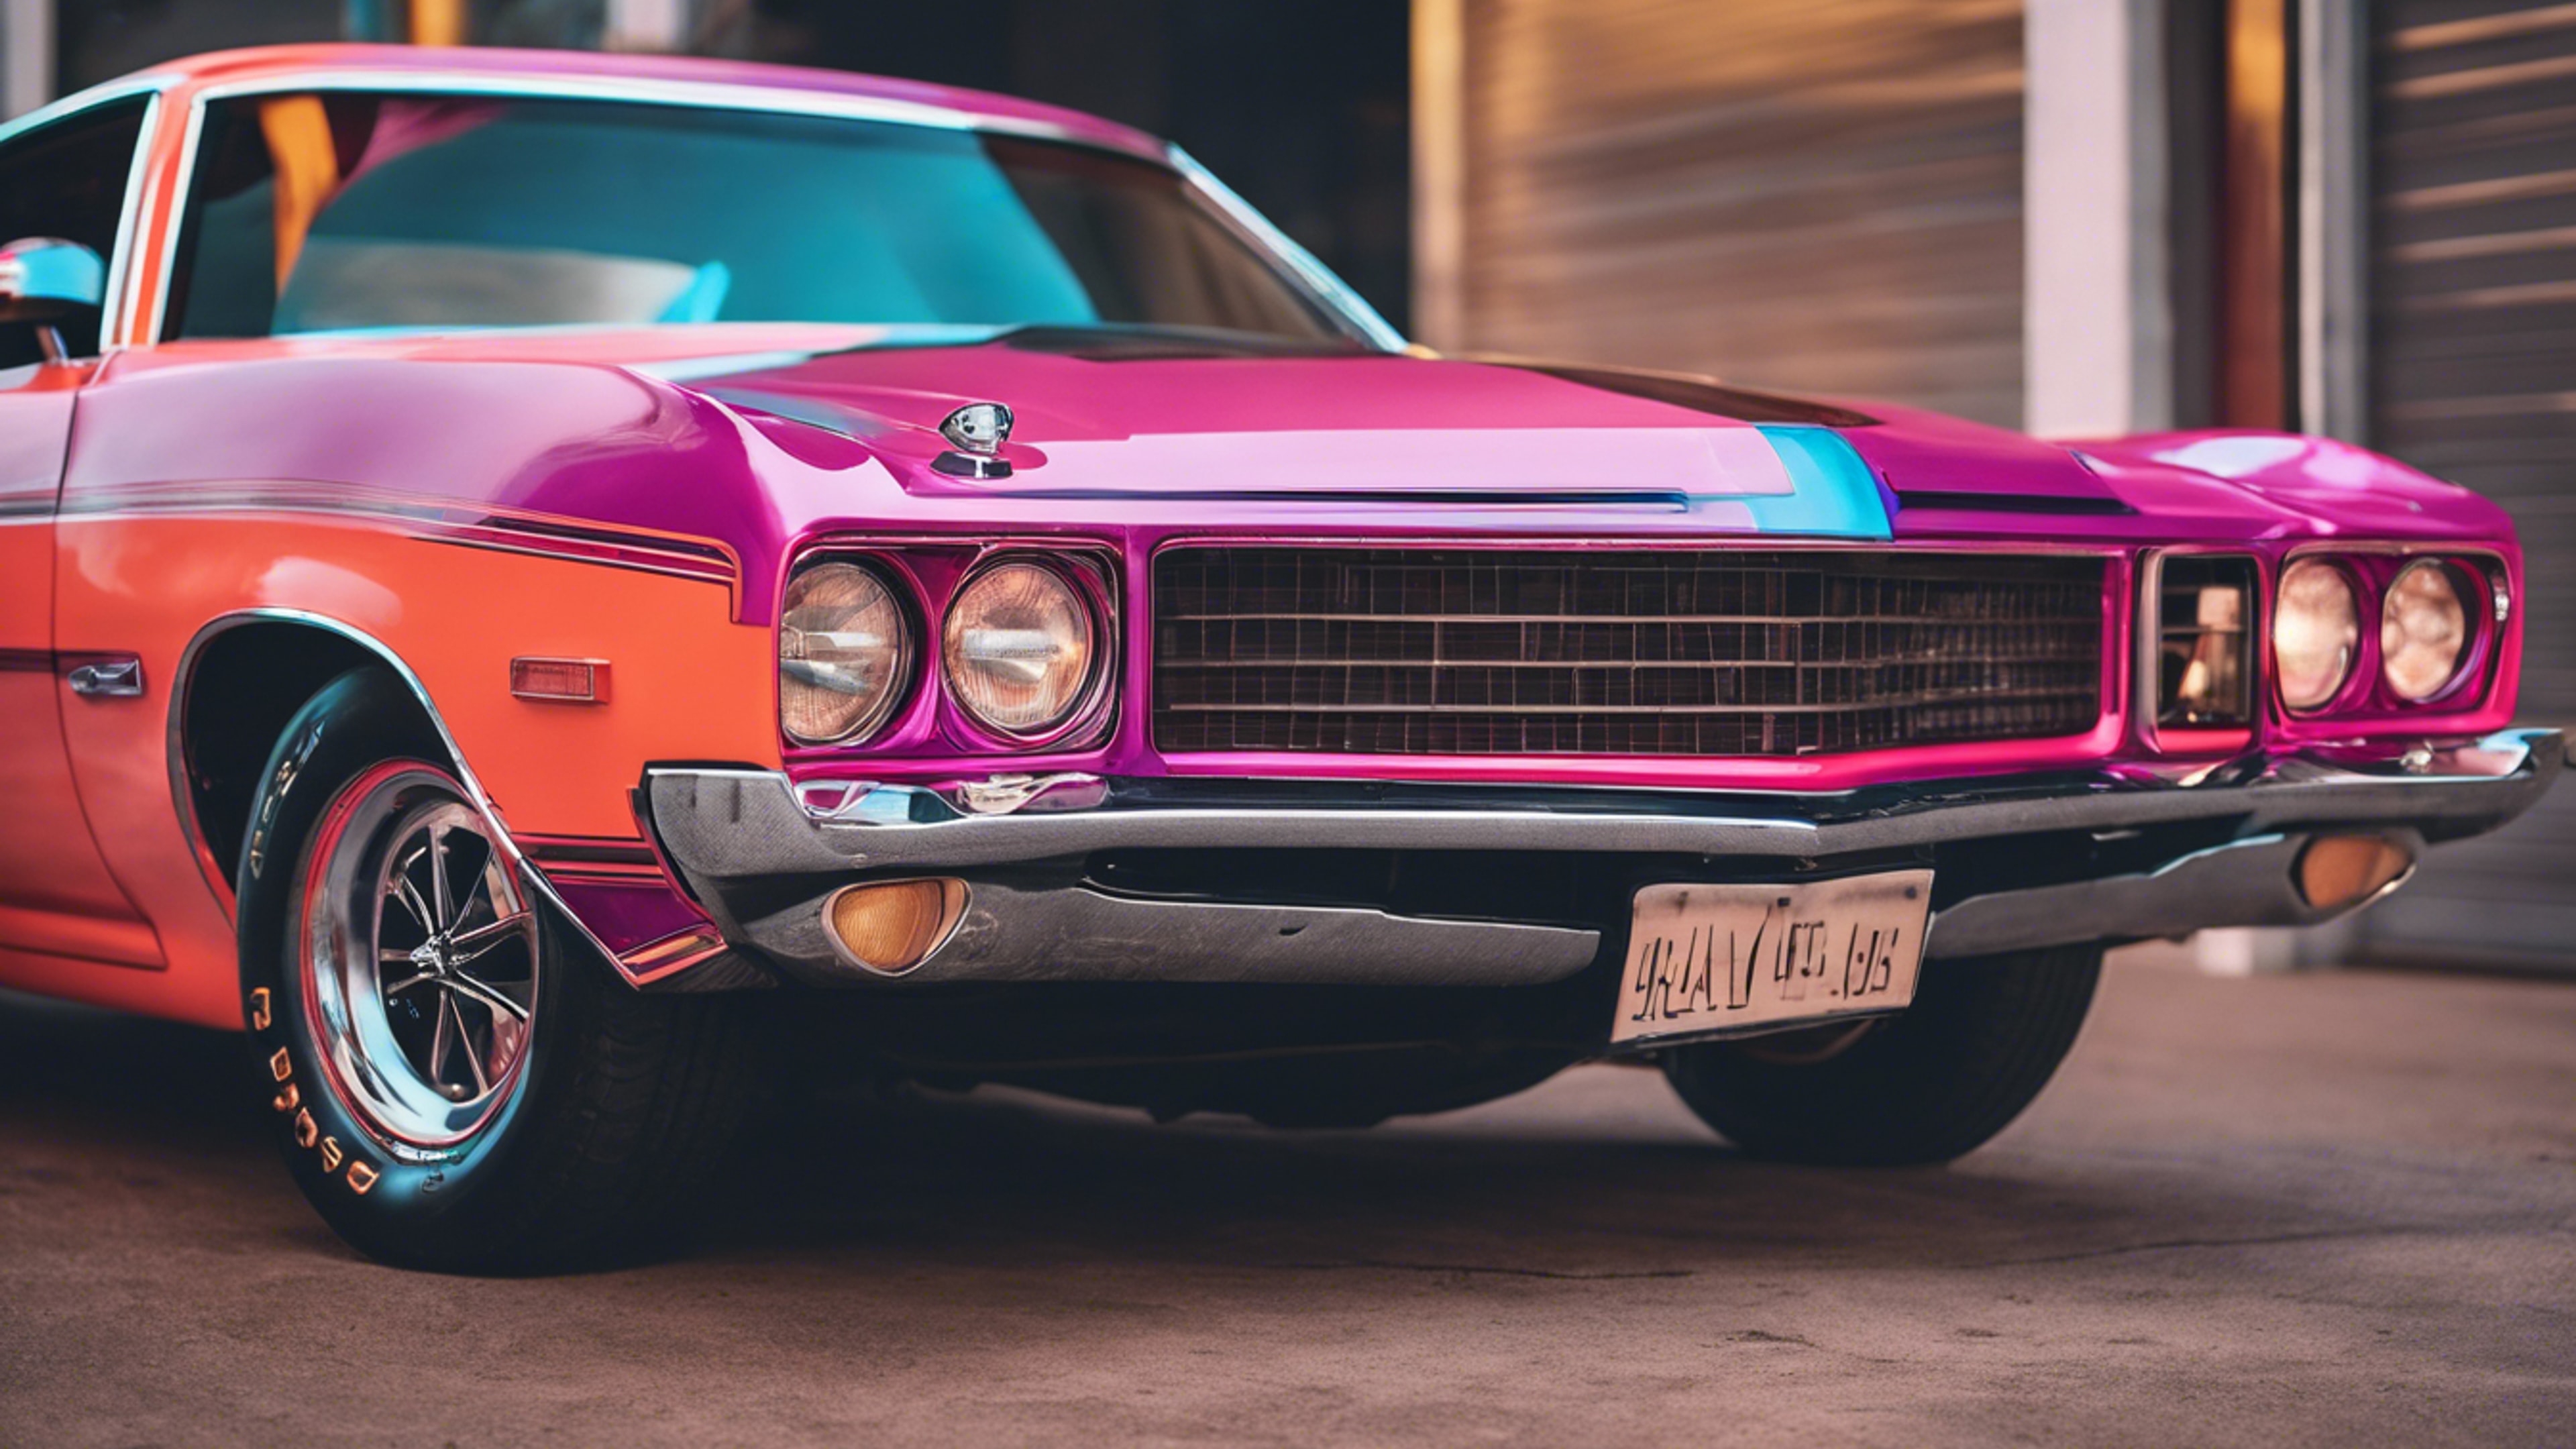 A classic American muscle car from the 1970s, printed in bright neon colors Papel de parede[fa60d4cf89e348ffade4]